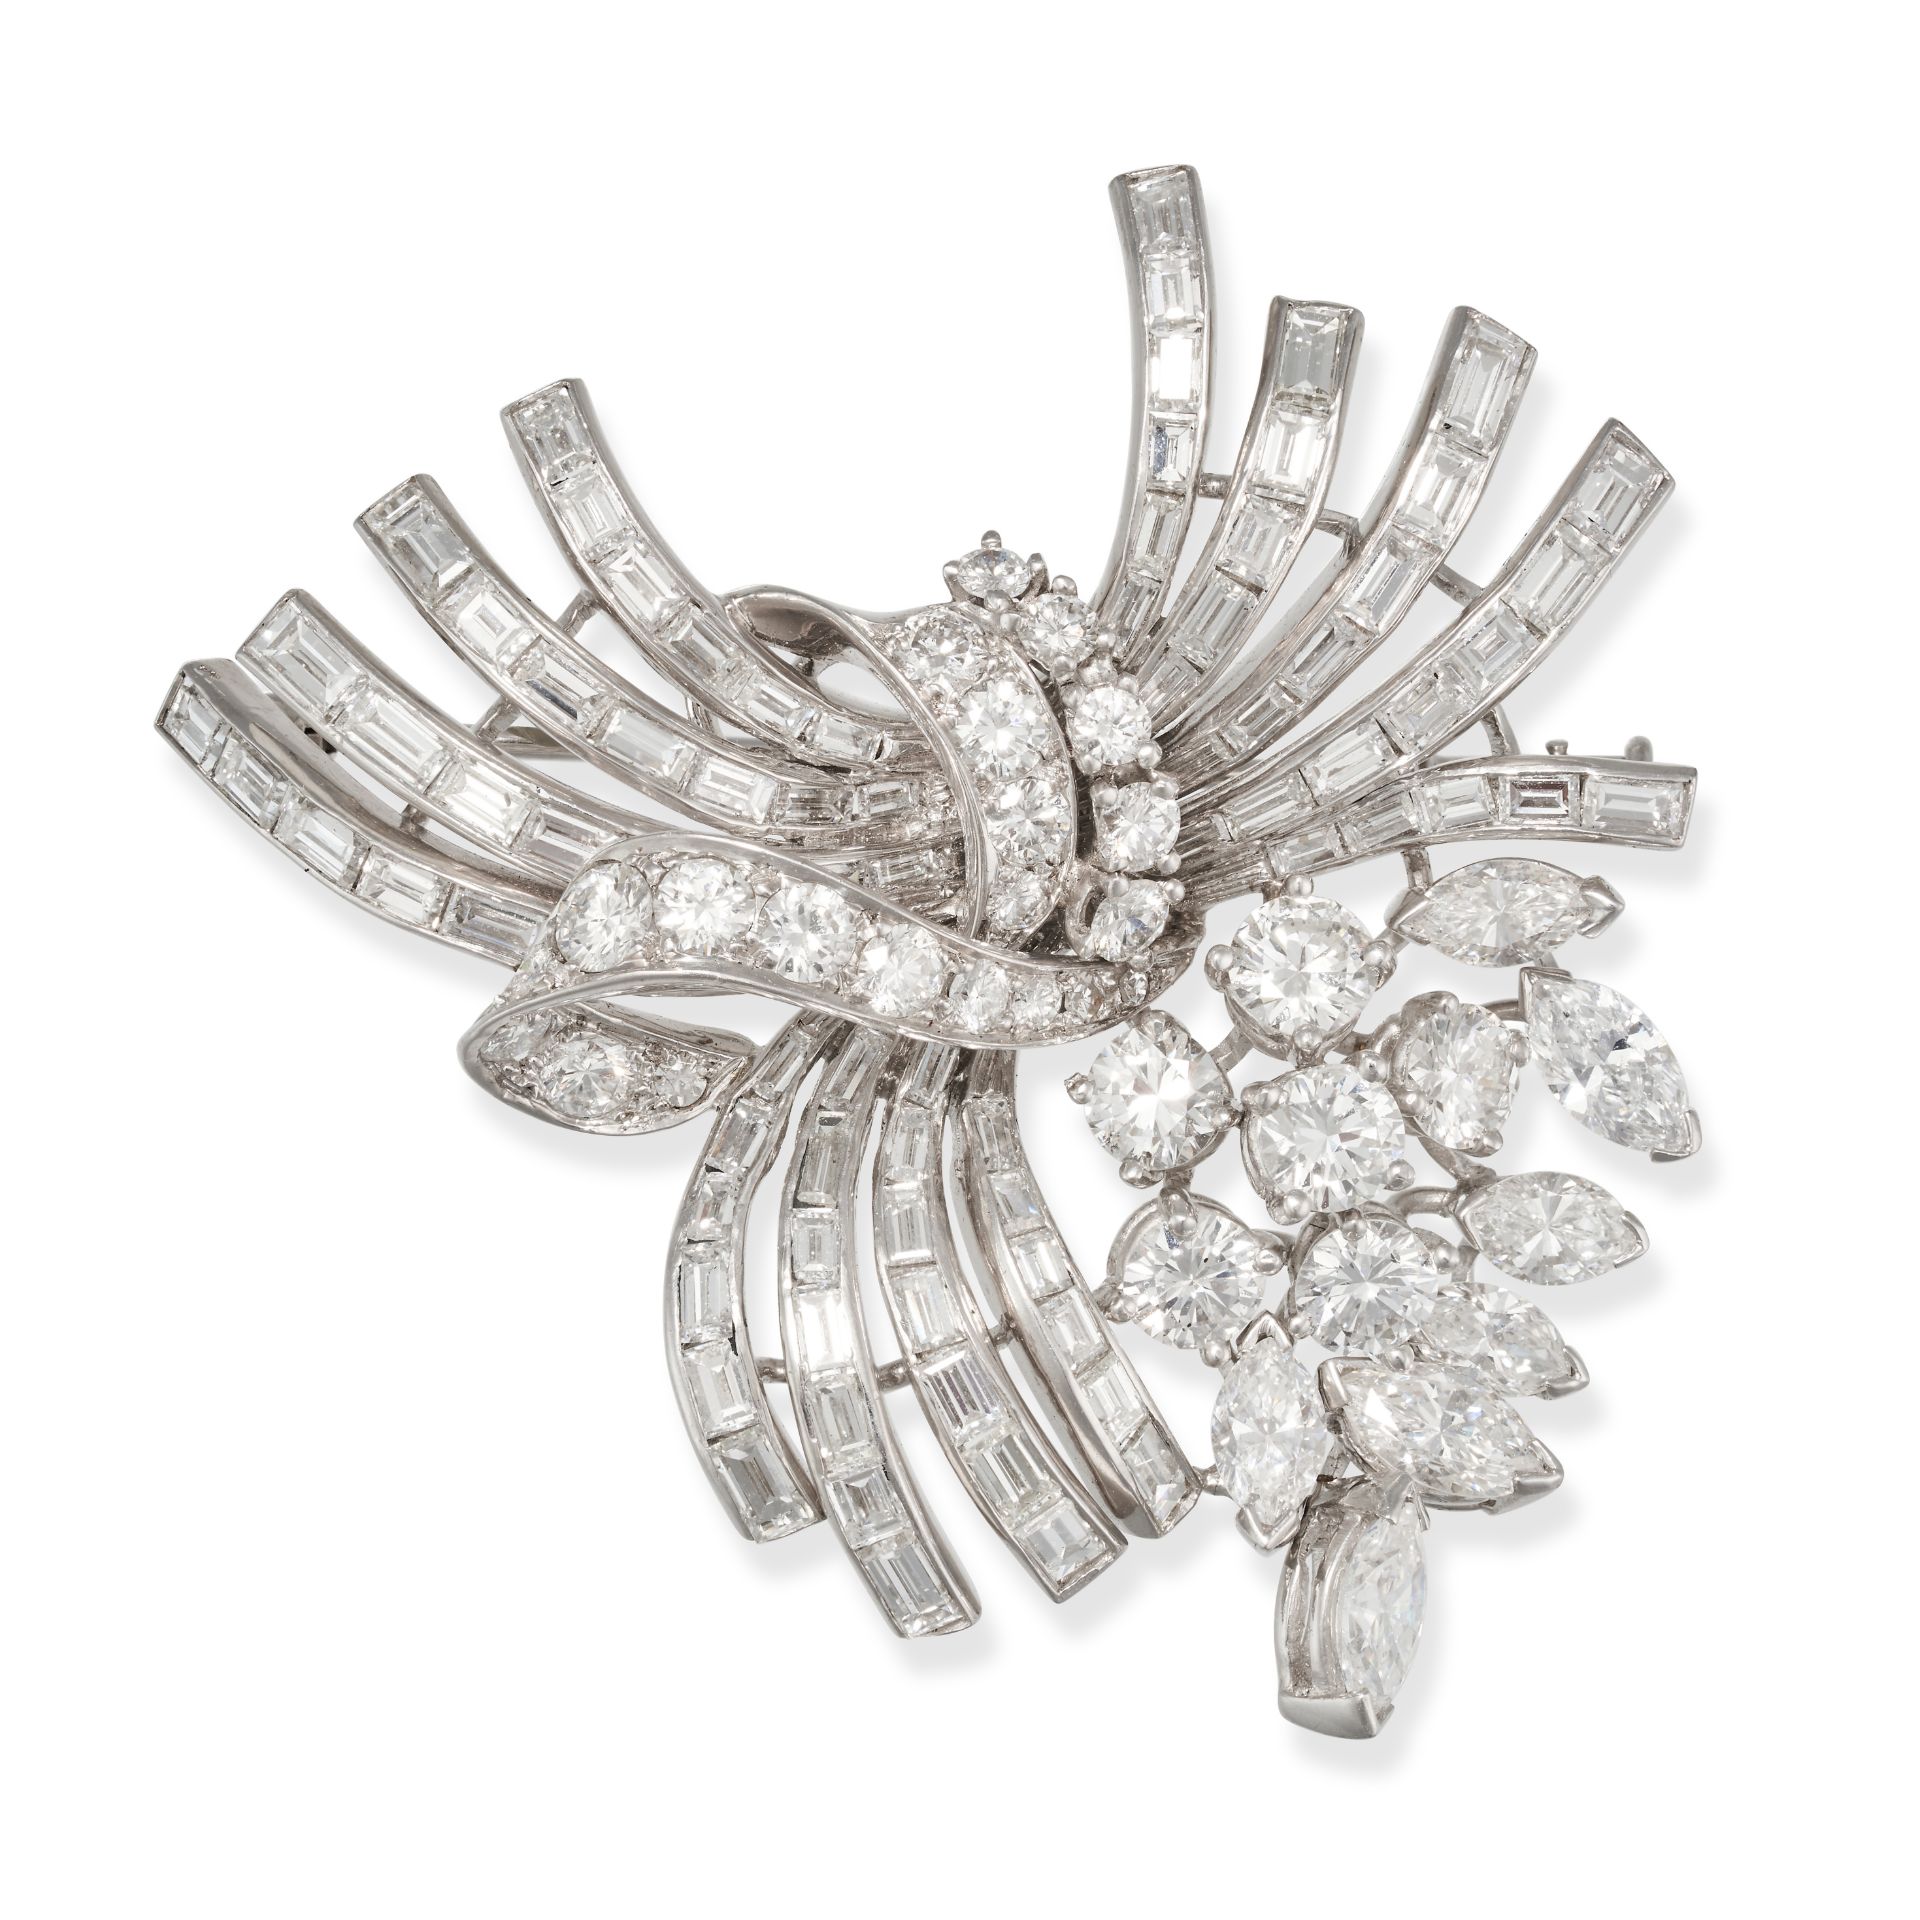 A DIAMOND SPRAY BROOCH in platinum, designed as an abstract floral spray set with round brilliant...